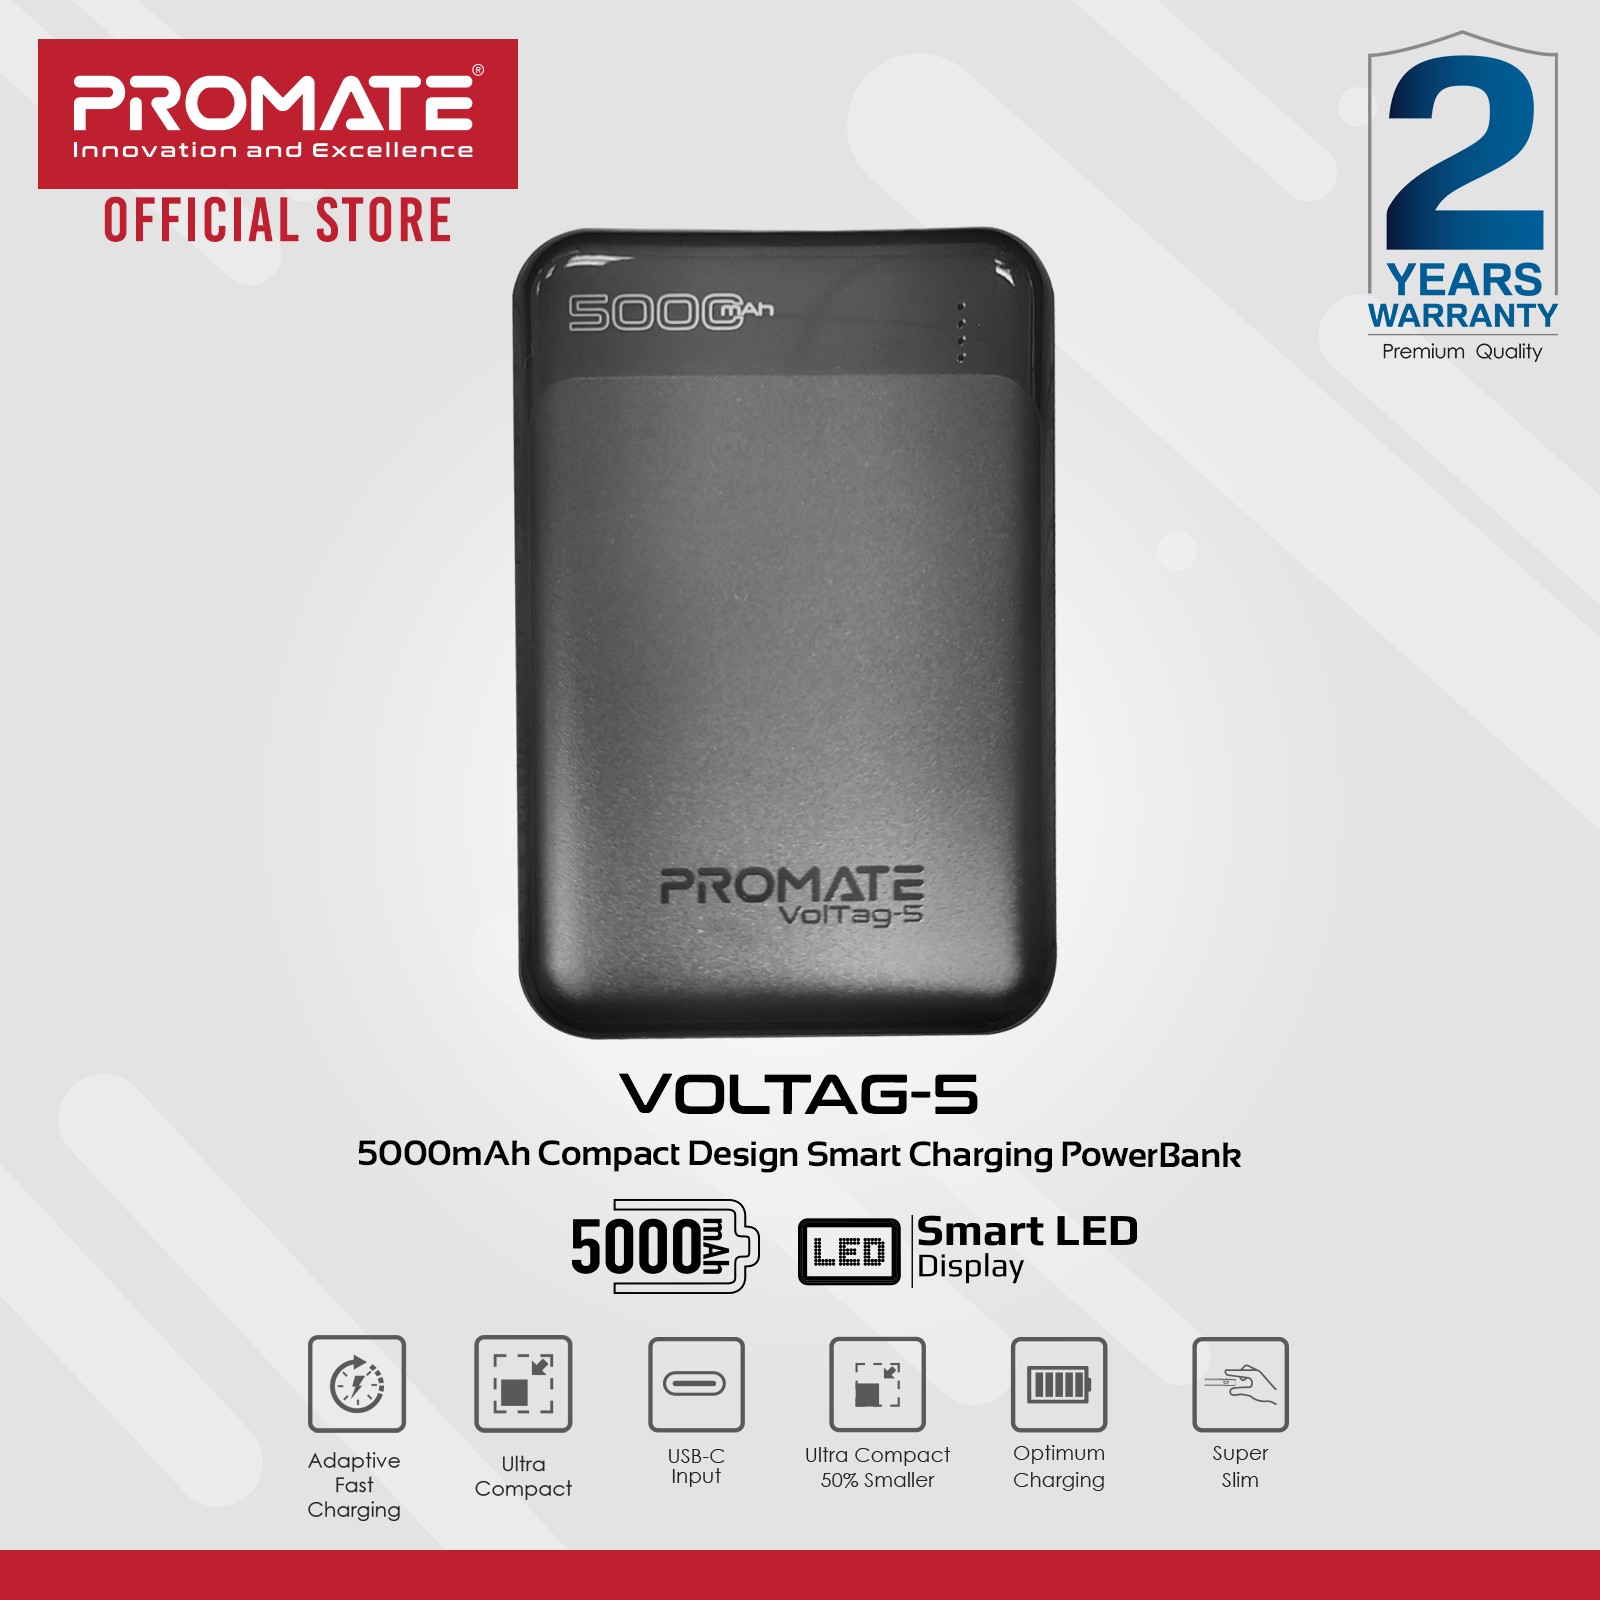 Promate VolTag-5 5000mAh Super-Slim Power Bank with Dual 2A USB